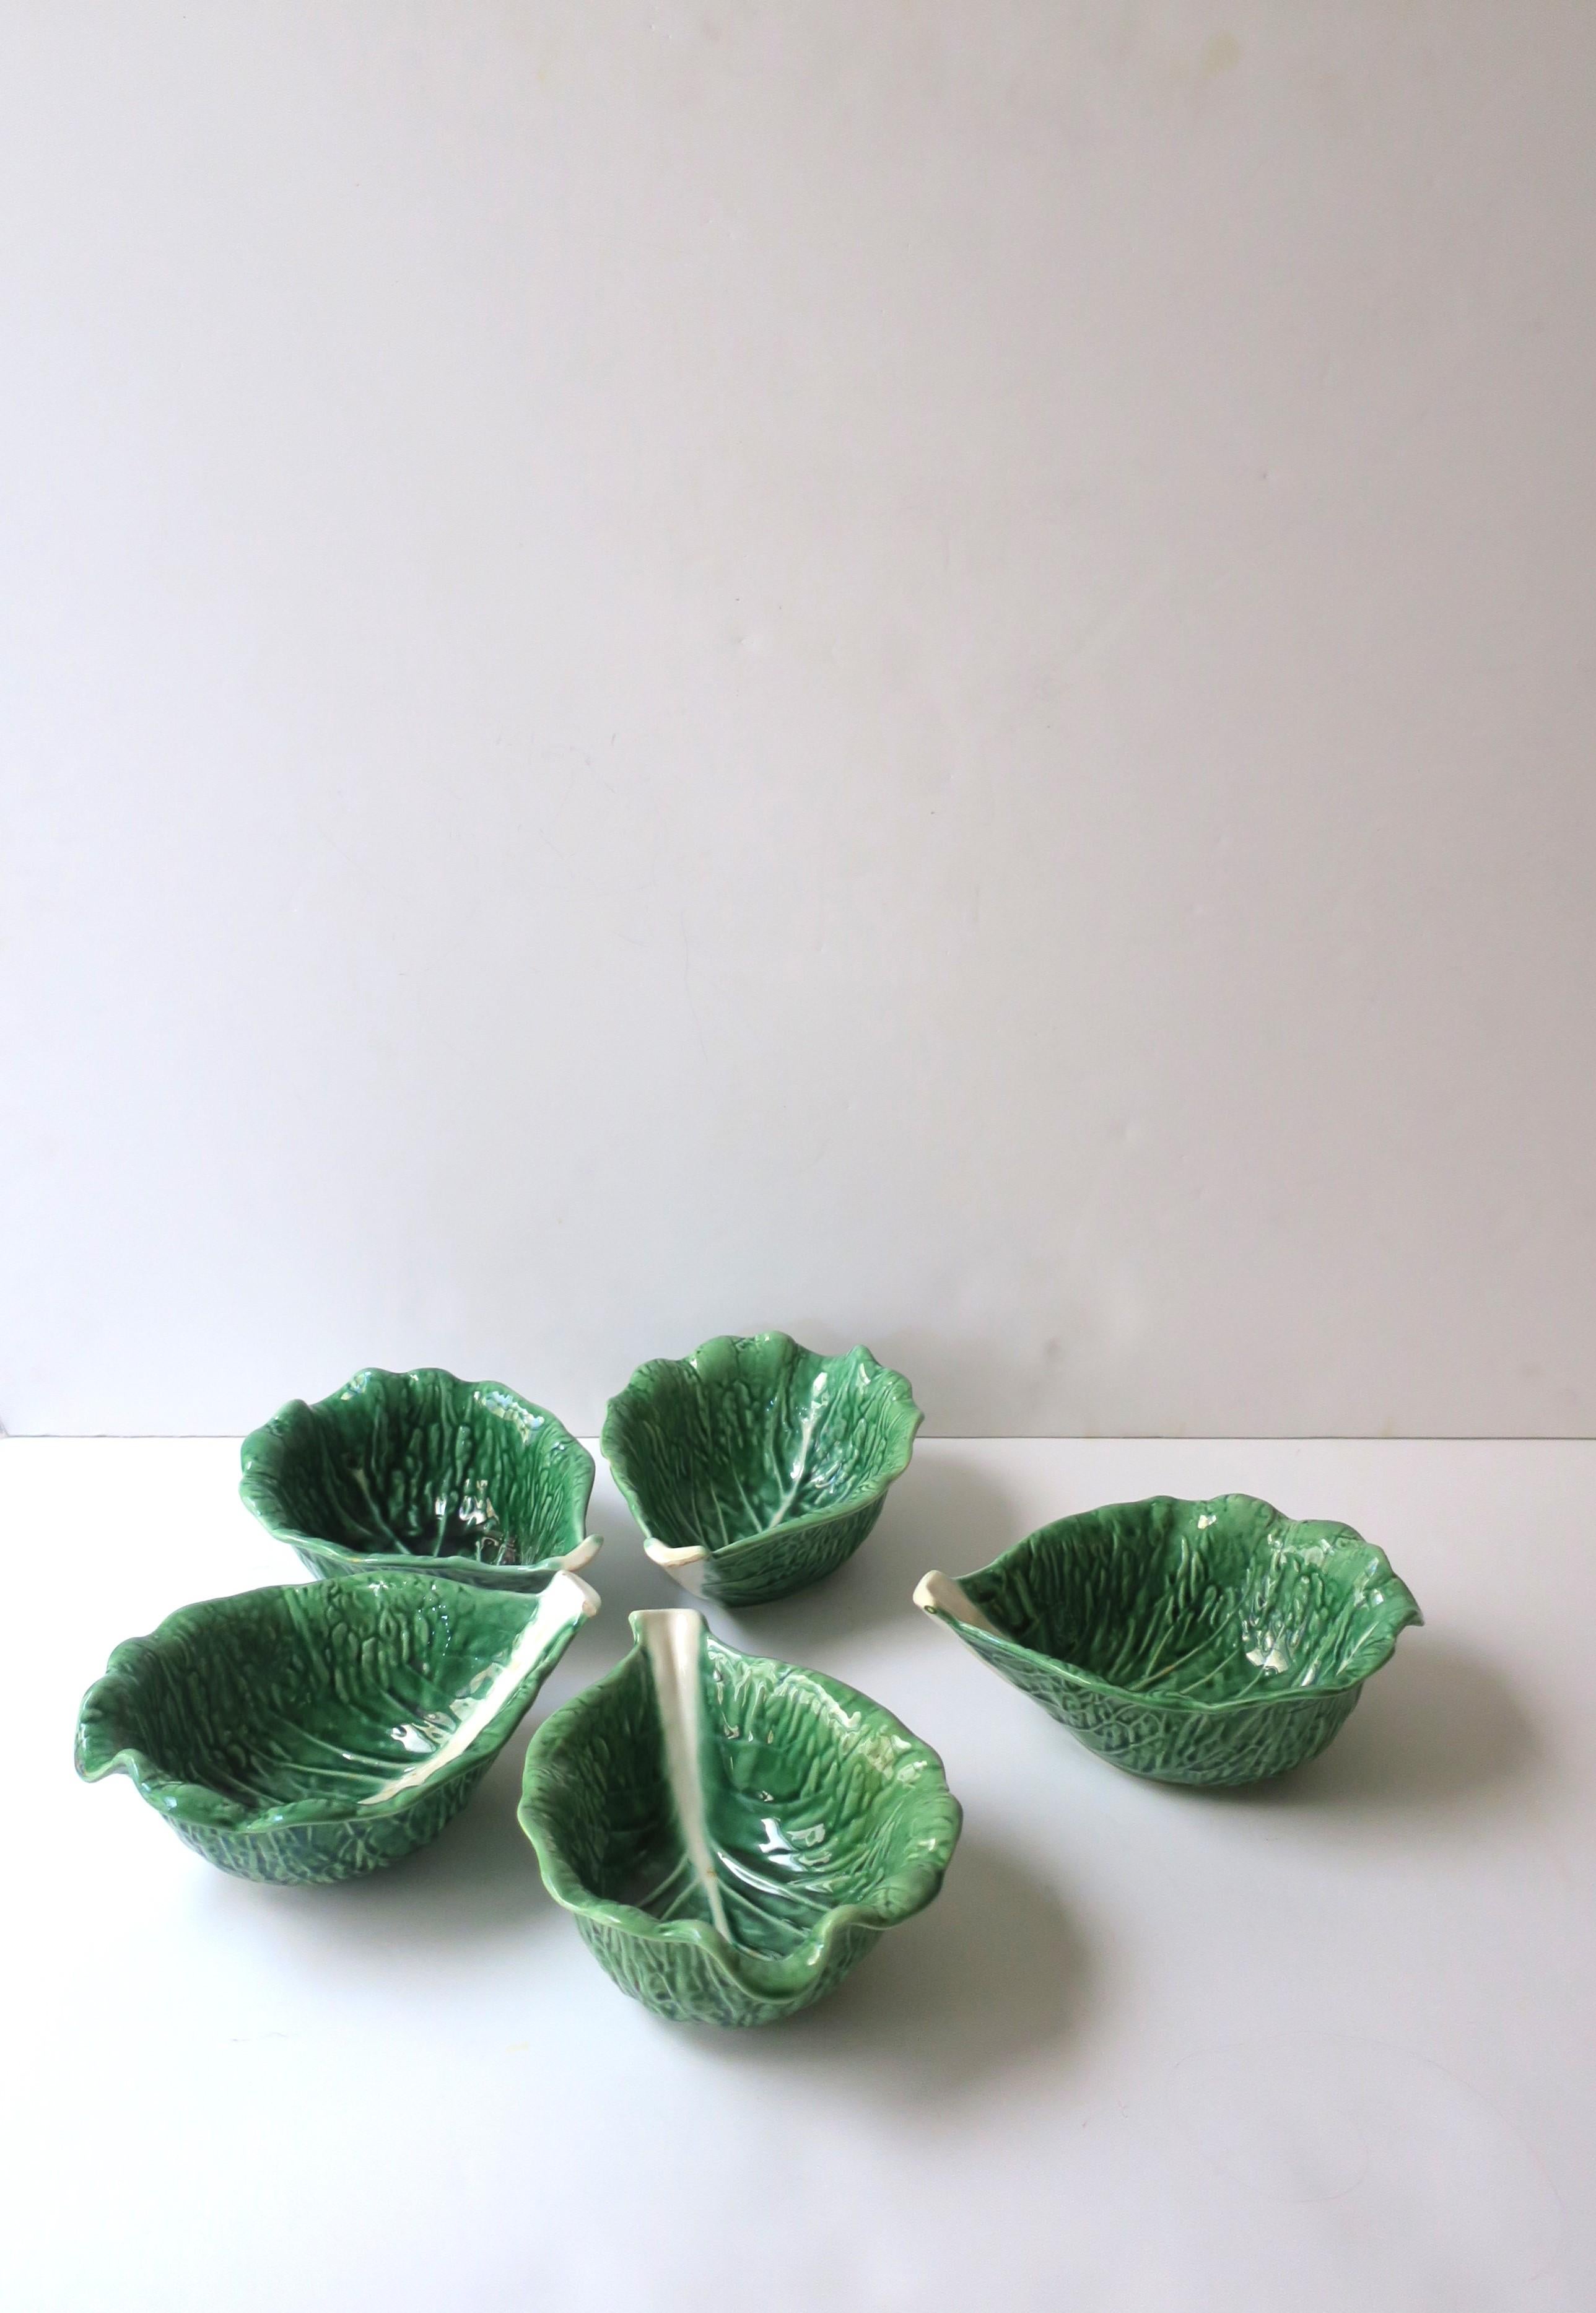 Portuguese Green Lettuce or Cabbage Leaf Serving or Dip Bowl Trompe l'Oeil Style, 5 Avail For Sale